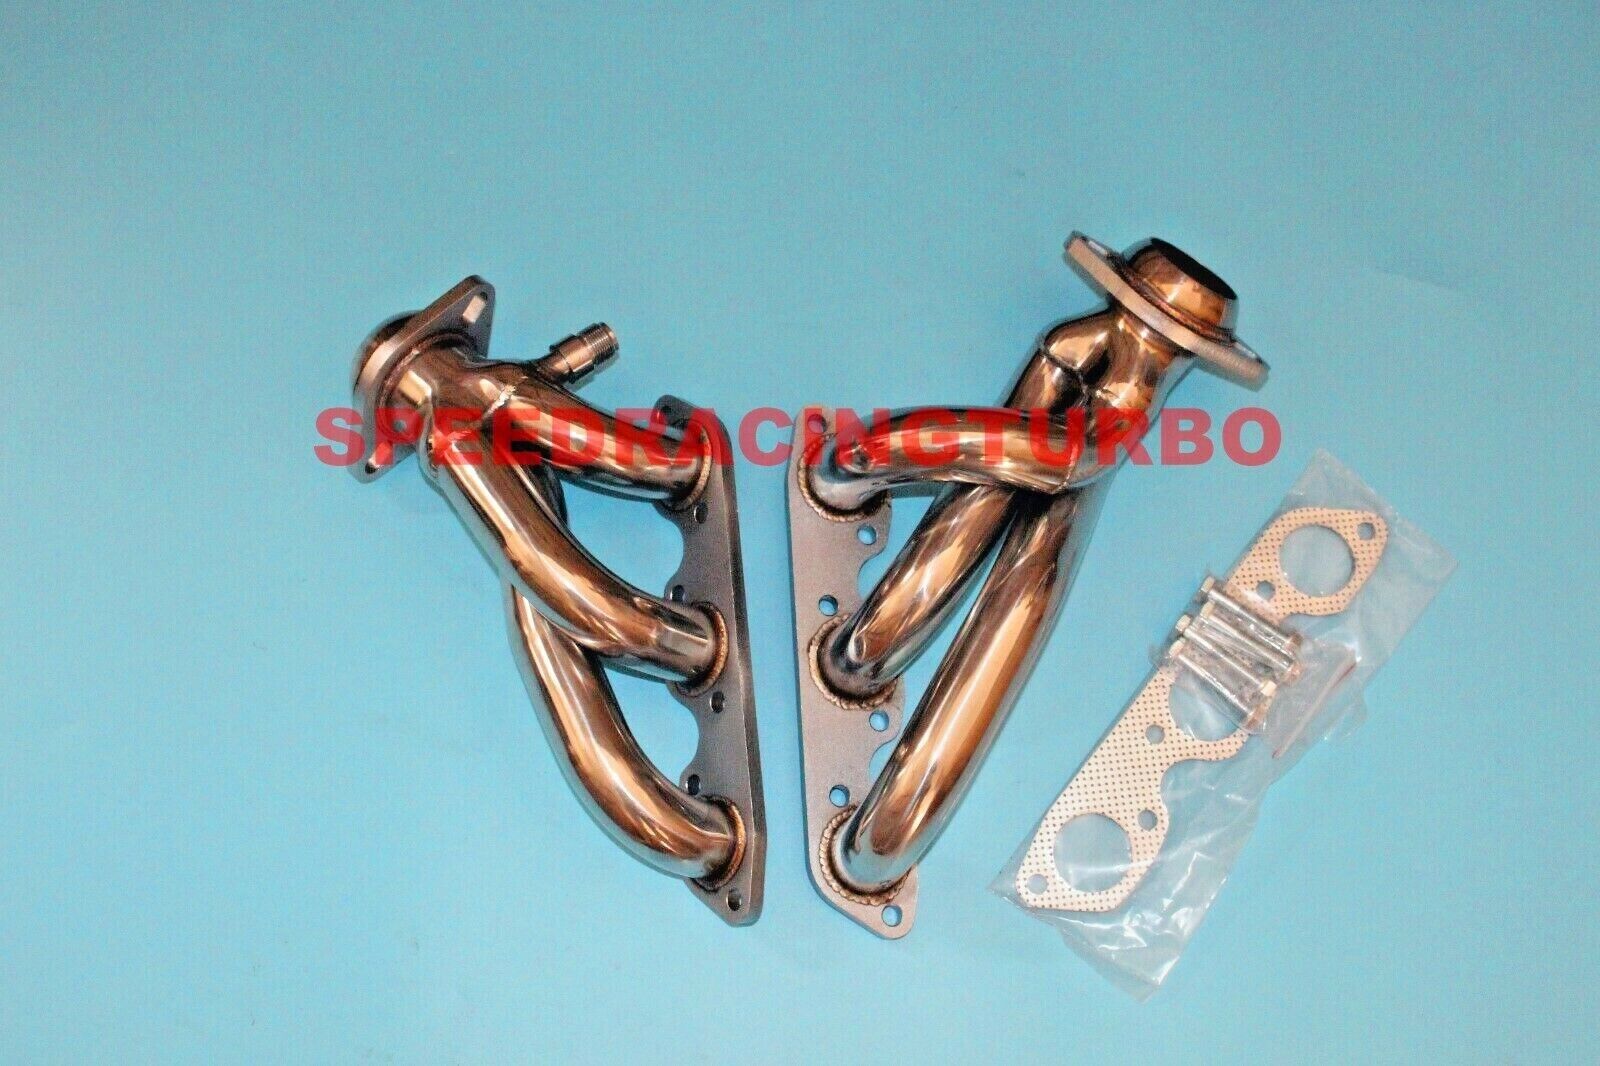 Stainless Steel Exhaust Shorty Headers Fits Ford Mustang 01-04 3.8L V6 Manifold